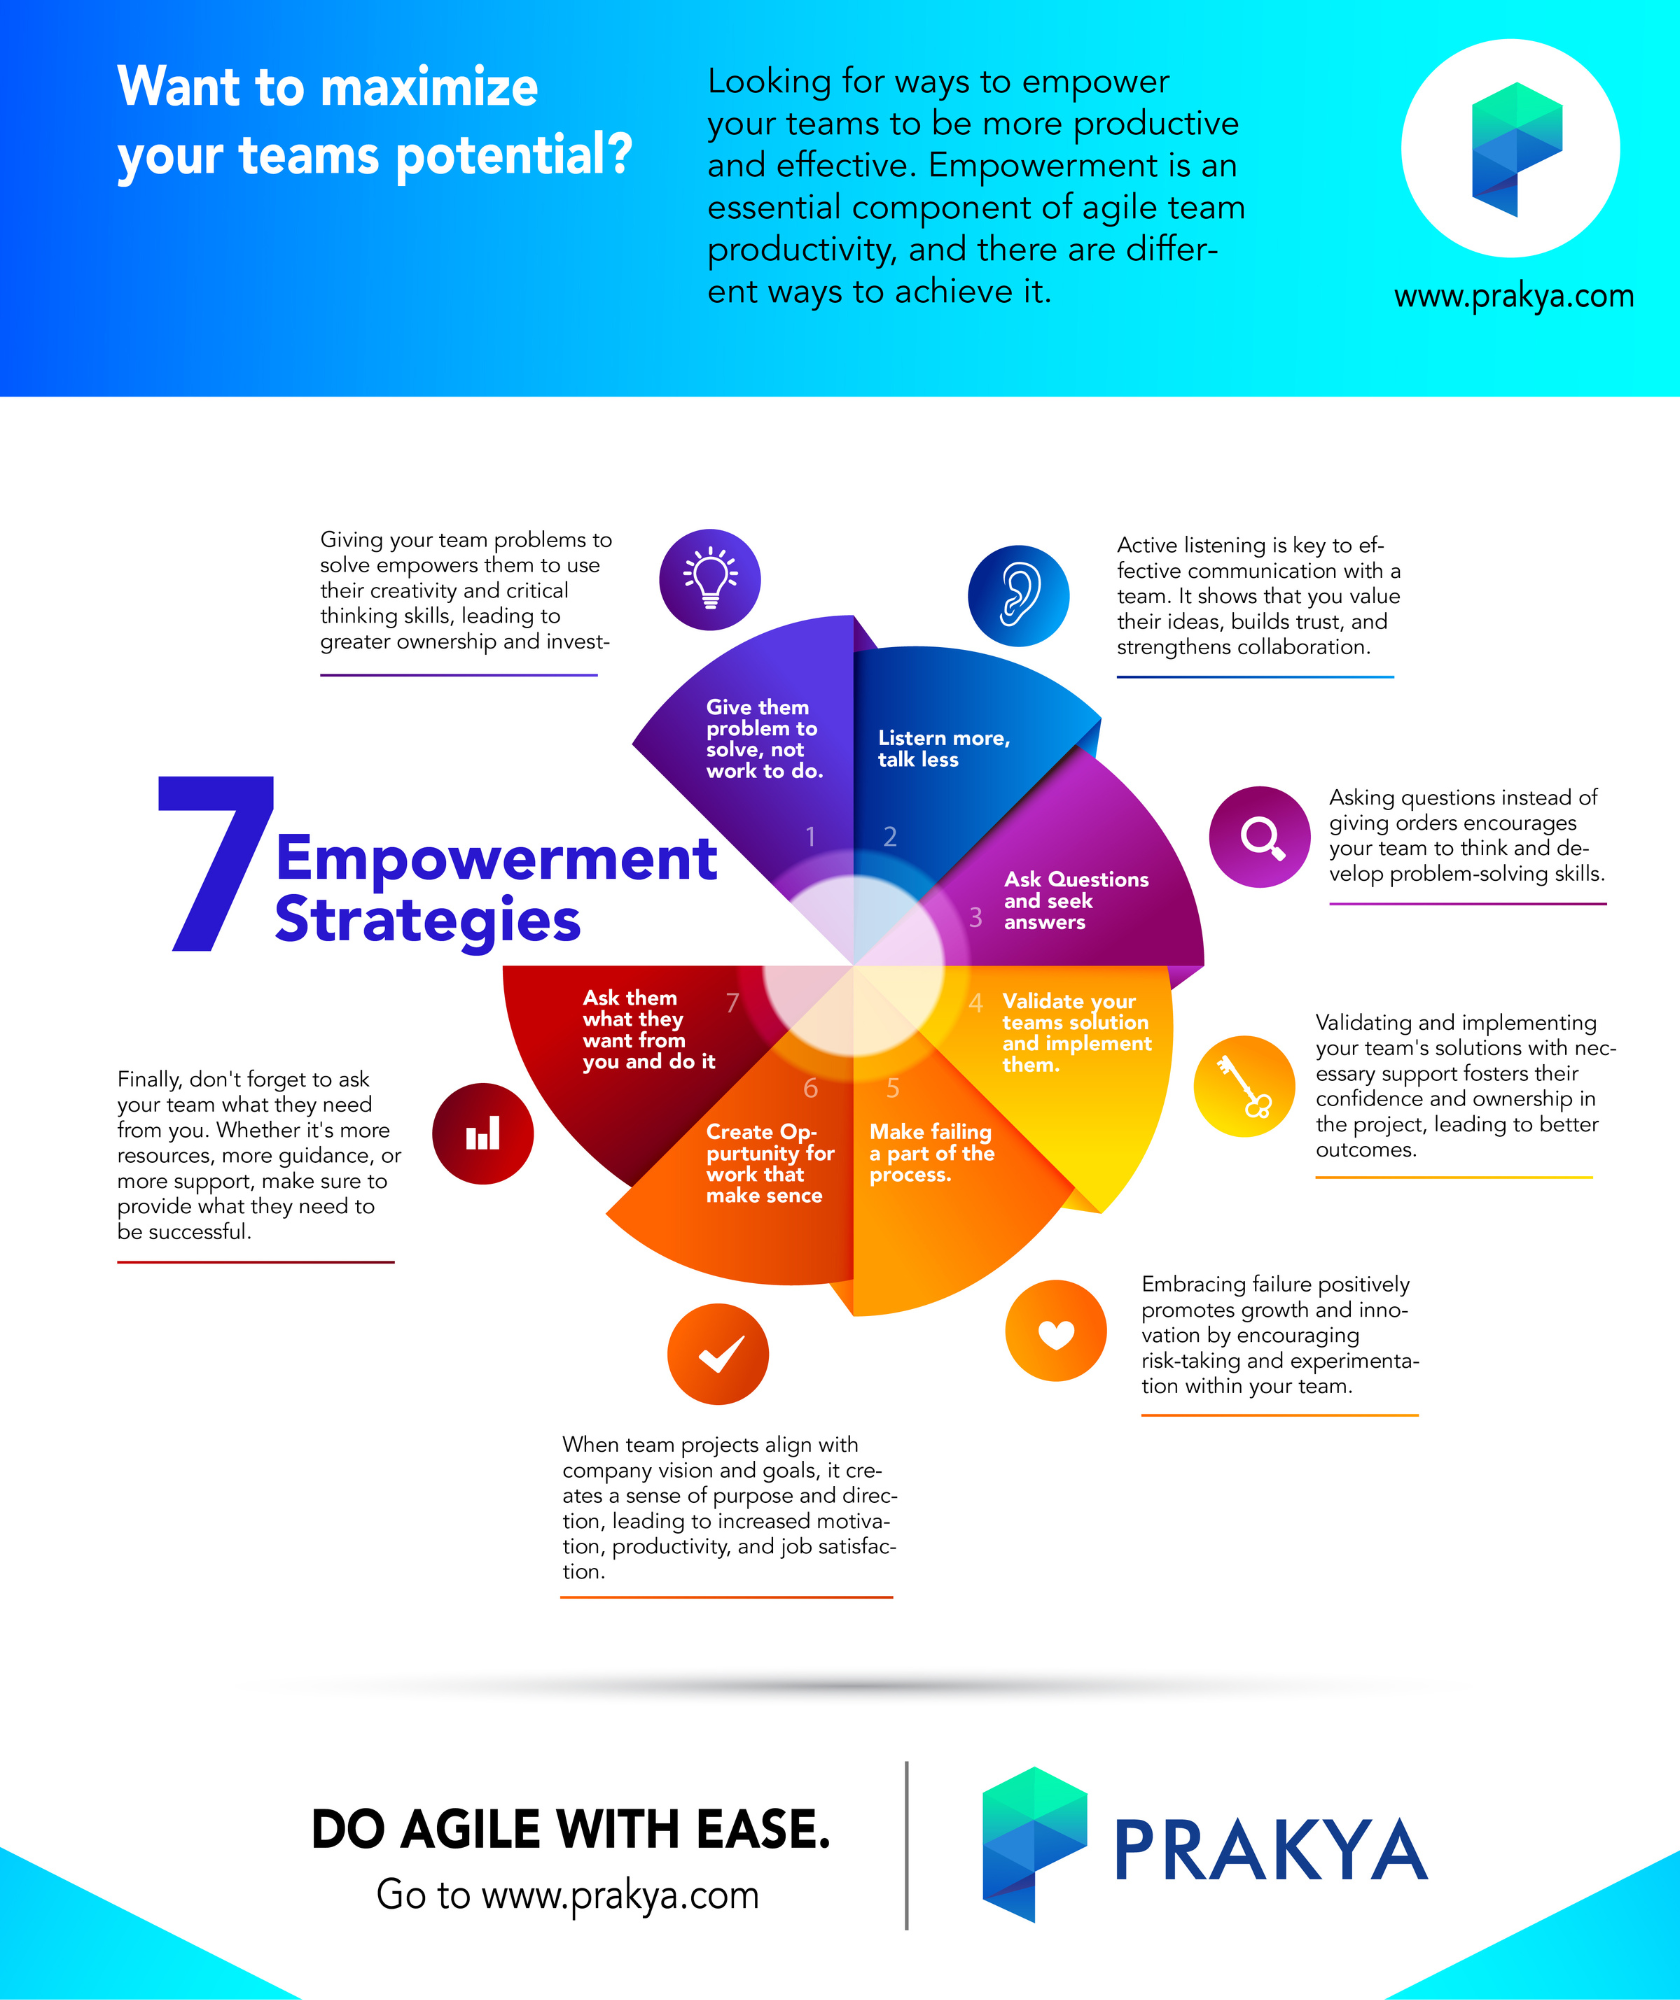  Prakya's Infographic illustrating seven out-of-the-box ways to empower teams in agile development, including problem-solving, active listening, asking questions, validating and implementing solutions, embracing failure, creating meaningful projects, and providing necessary support.